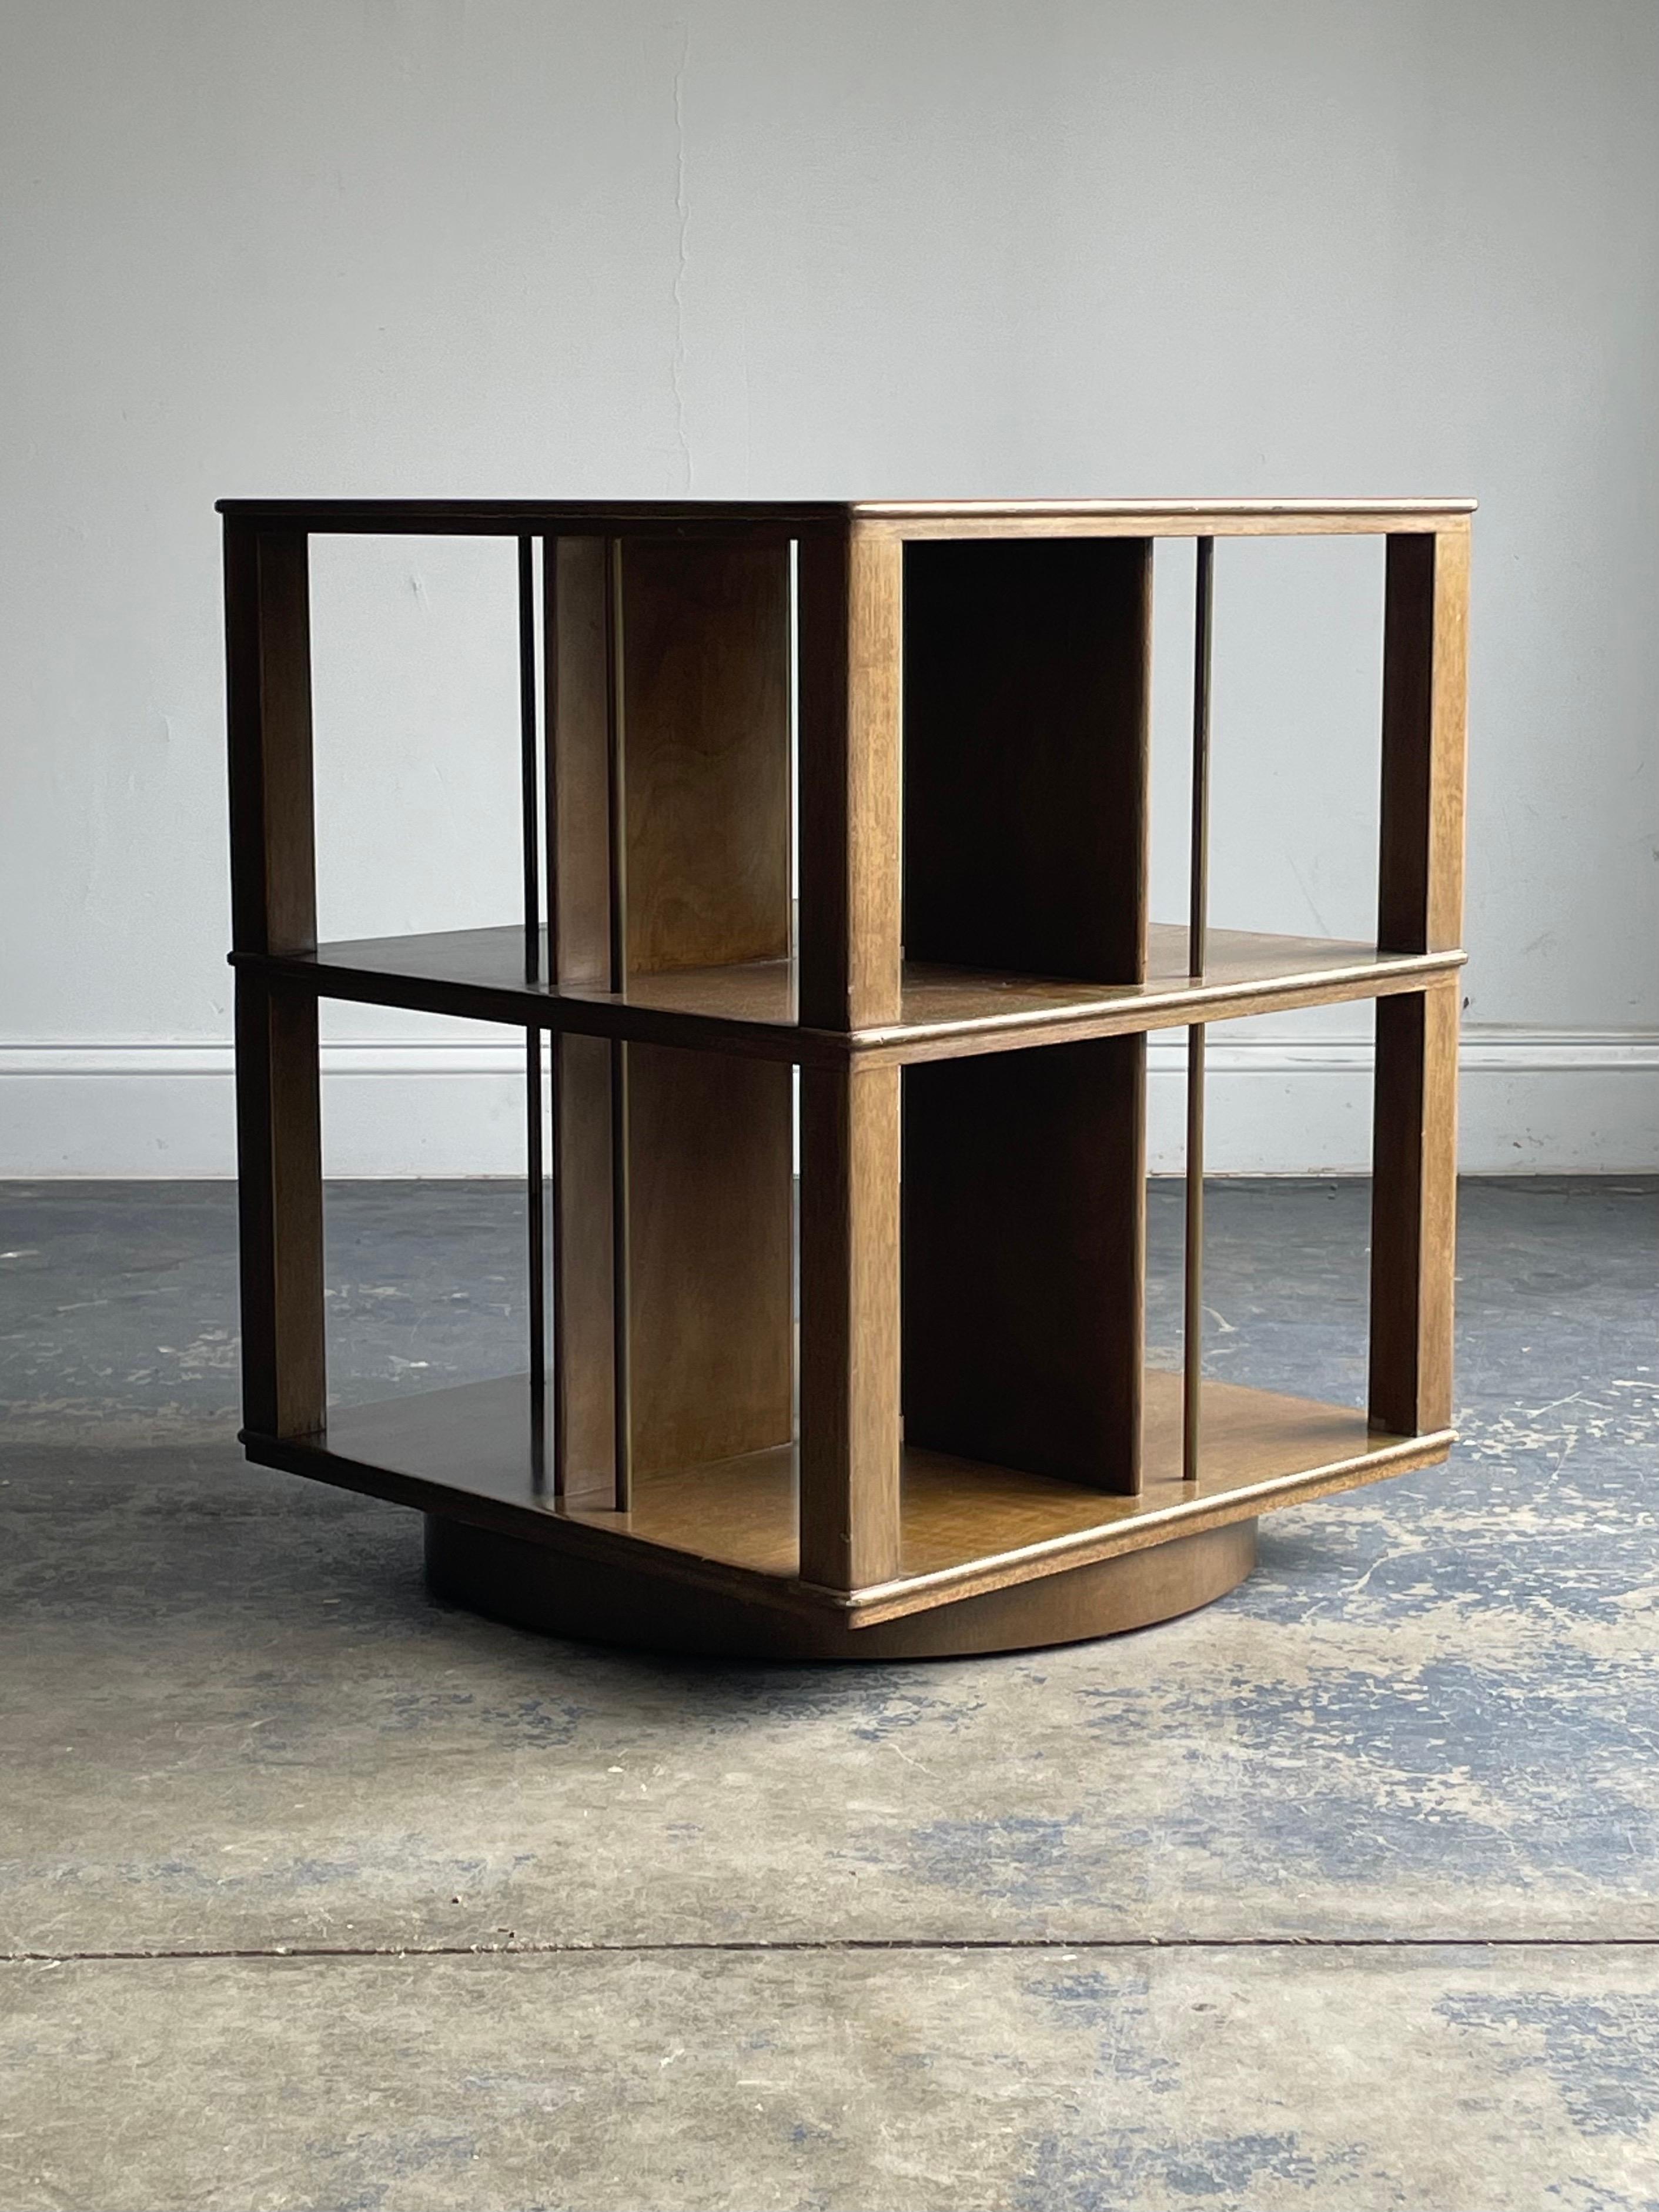 A rare revolving bookcase designed by Edward Wormley for Dunbar. Model no. 5405.

Listing is for one table, a second table is available in the same finish.

Would work well in a variety of interiors such as modern, mid century modern, contemporary,